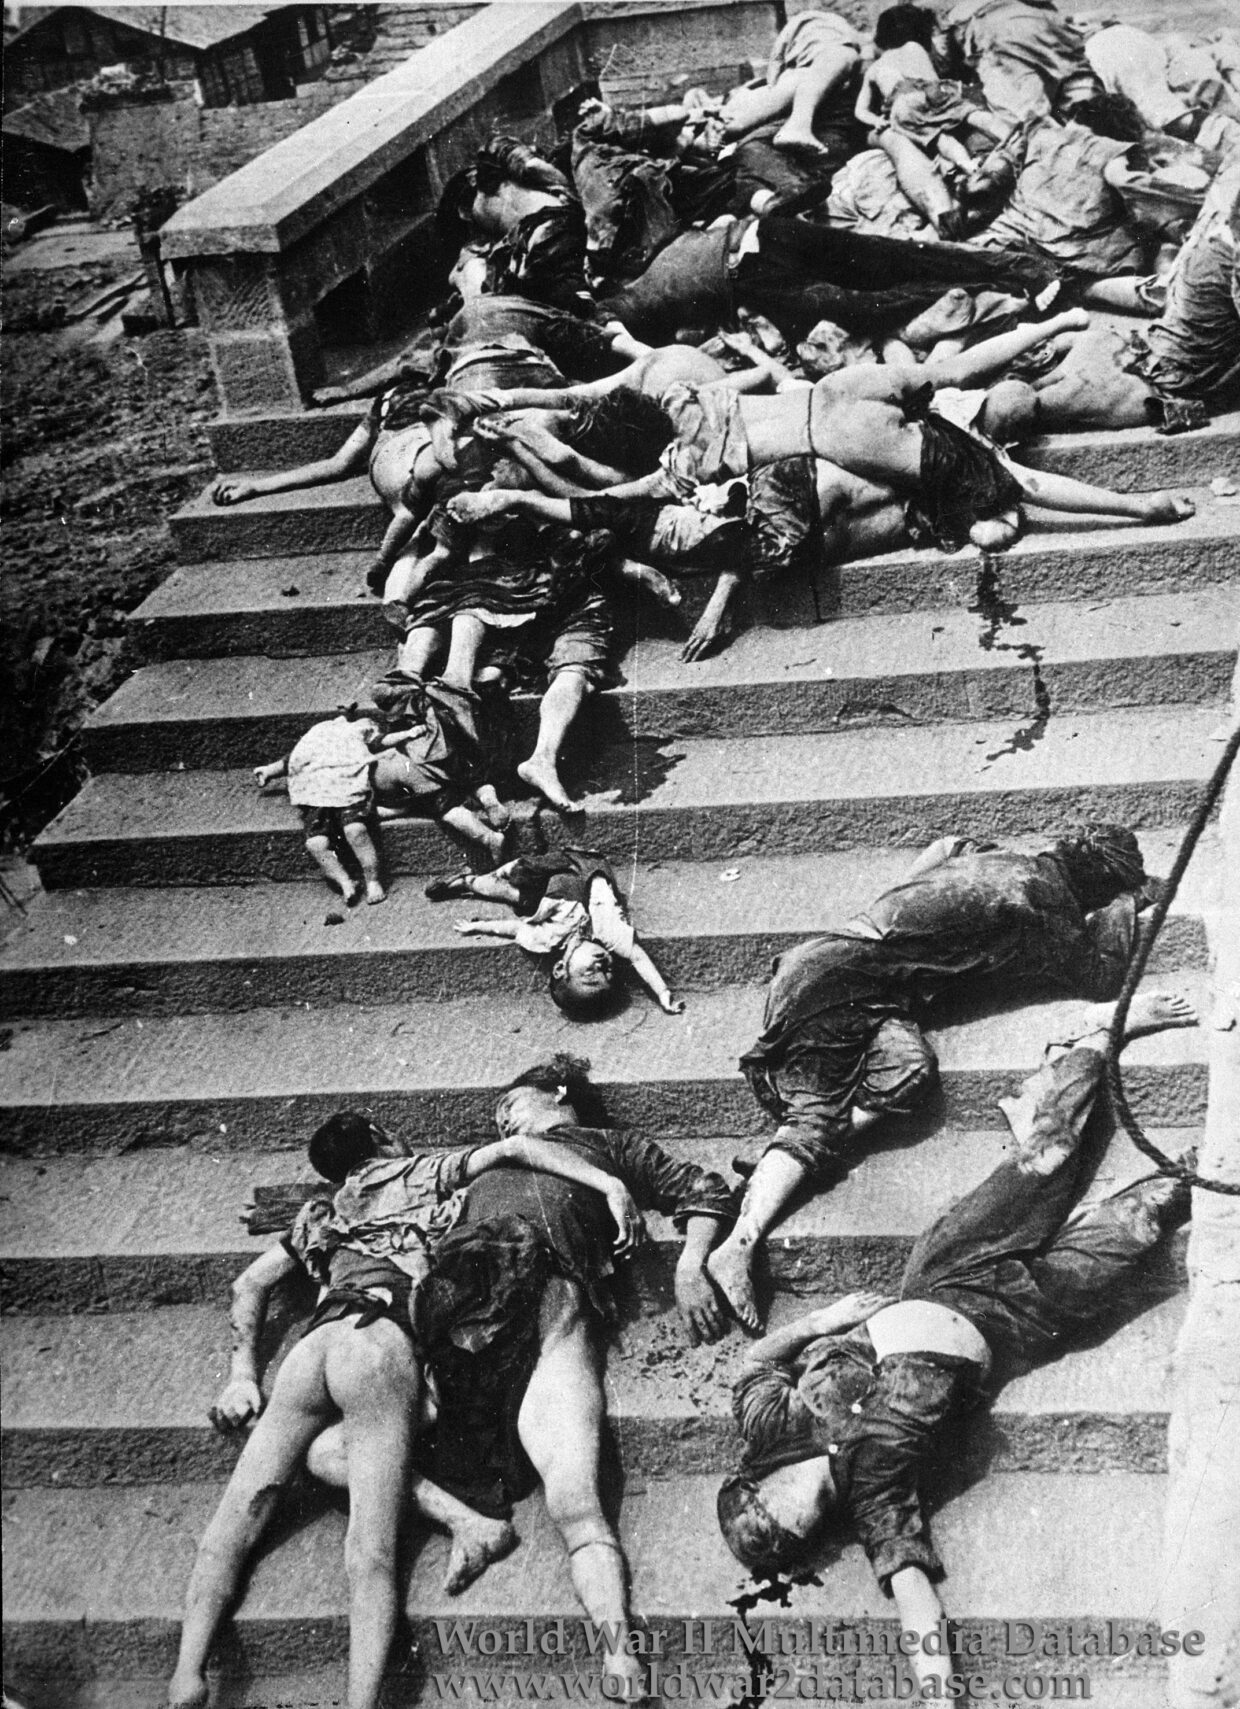 Corpses Outside Chongqing Shelter